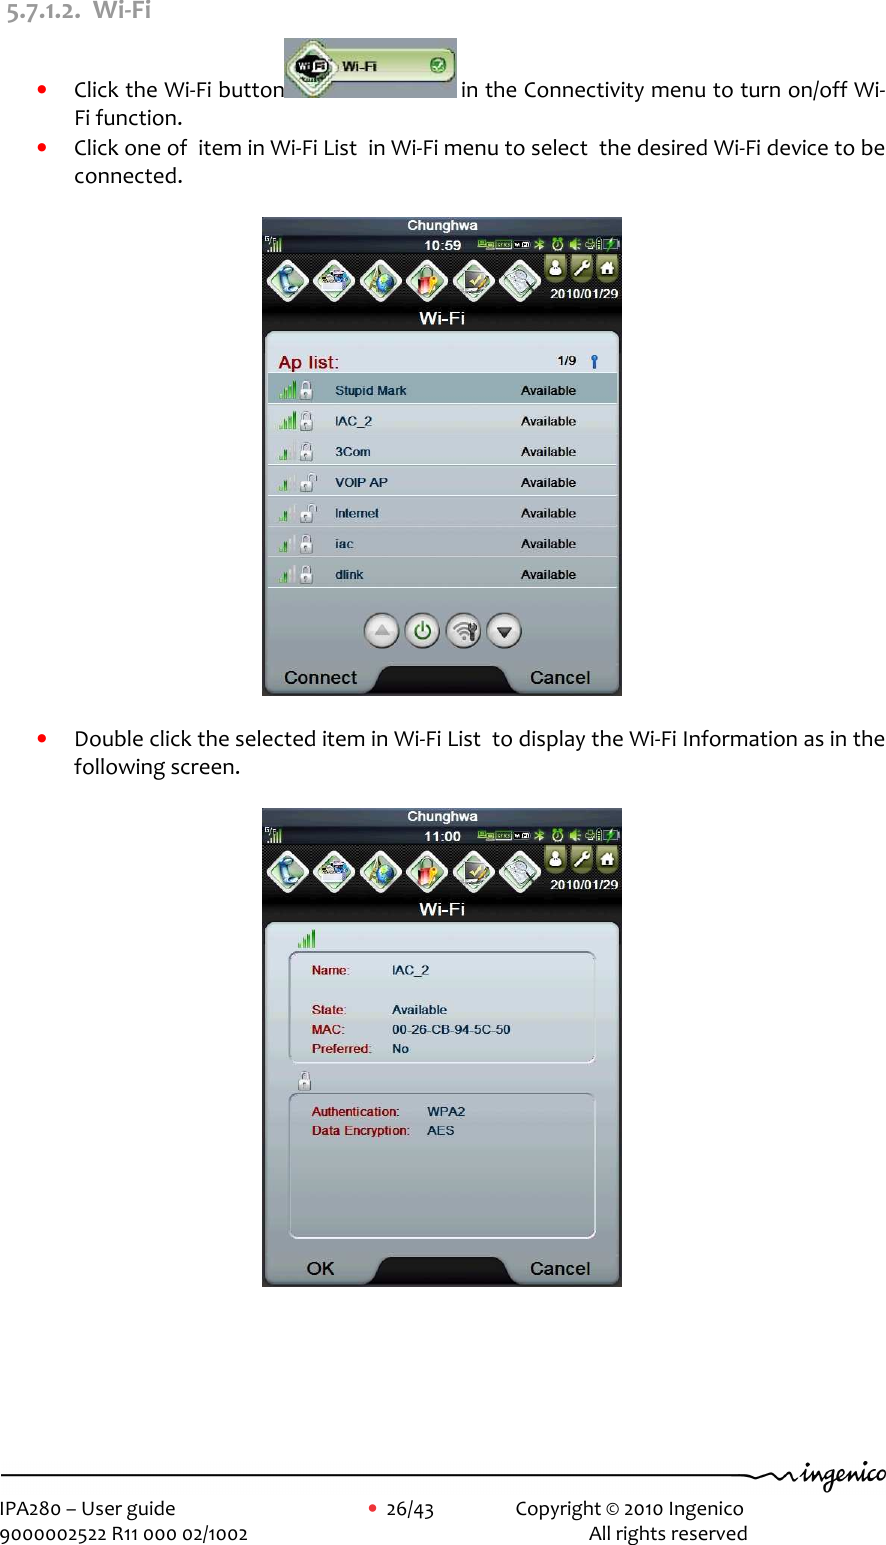     IPA280 – User guide      •  26/43    Copyright © 2010 Ingenico   9000002522 R11 000 02/1002          All rights reserved         5.7.1.2. Wi-Fi • Click the Wi-Fi button  in the Connectivity menu to turn on/off Wi-Fi function.   • Click one of  item in Wi-Fi List  in Wi-Fi menu to select  the desired Wi-Fi device to be connected.    • Double click the selected item in Wi-Fi List  to display the Wi-Fi Information as in the following screen.        